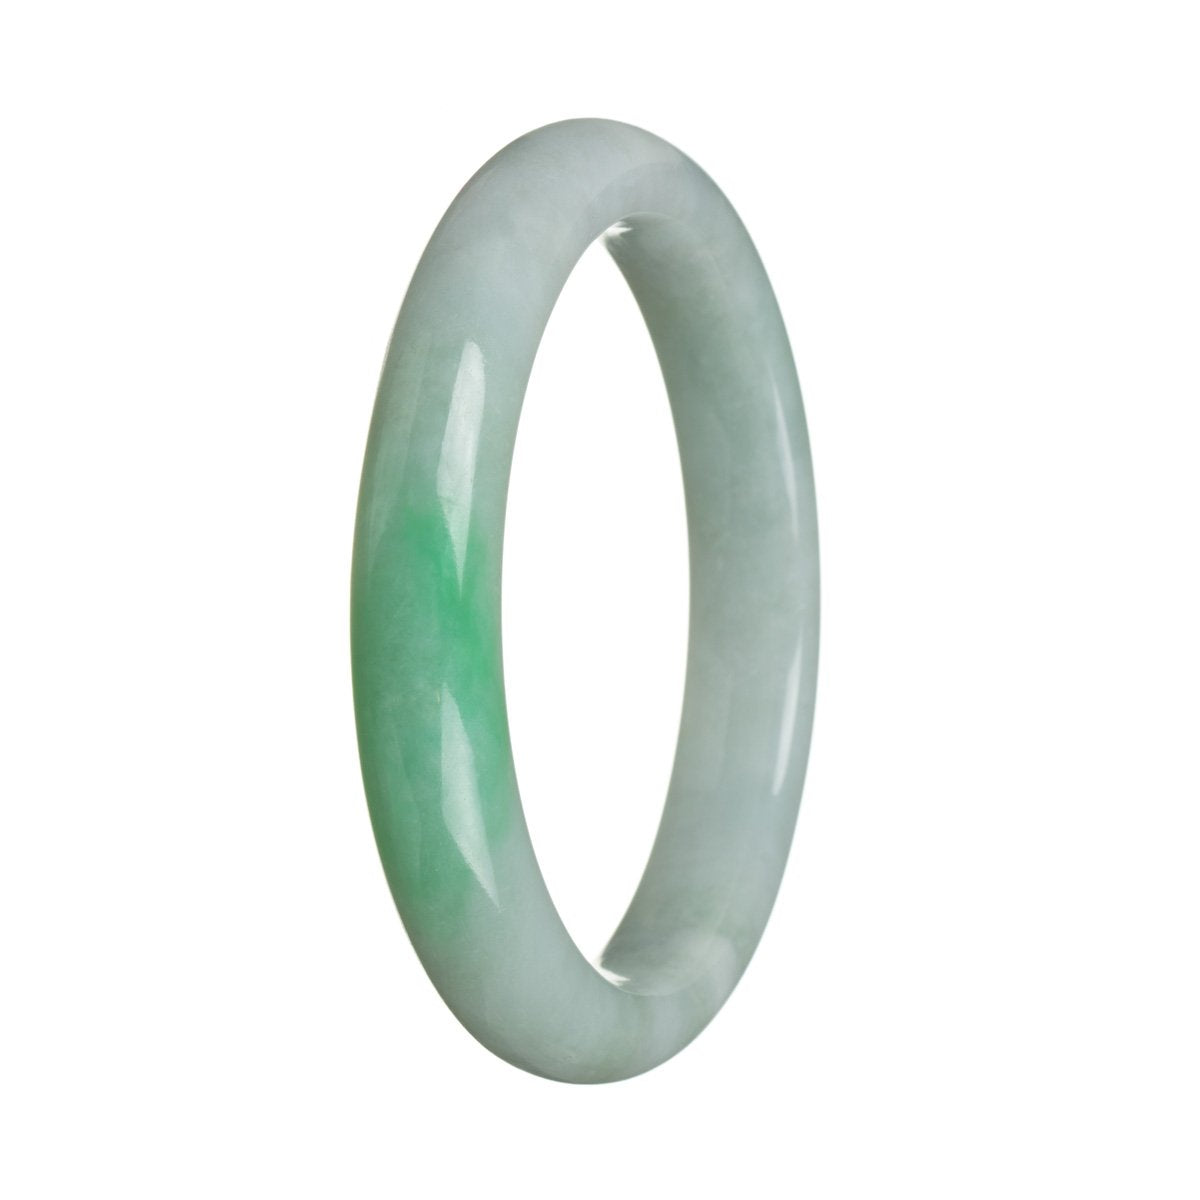 A stunning apple green Burmese jade bangle, Grade A quality, with a semi-round shape measuring 63mm. From MAYS GEMS.